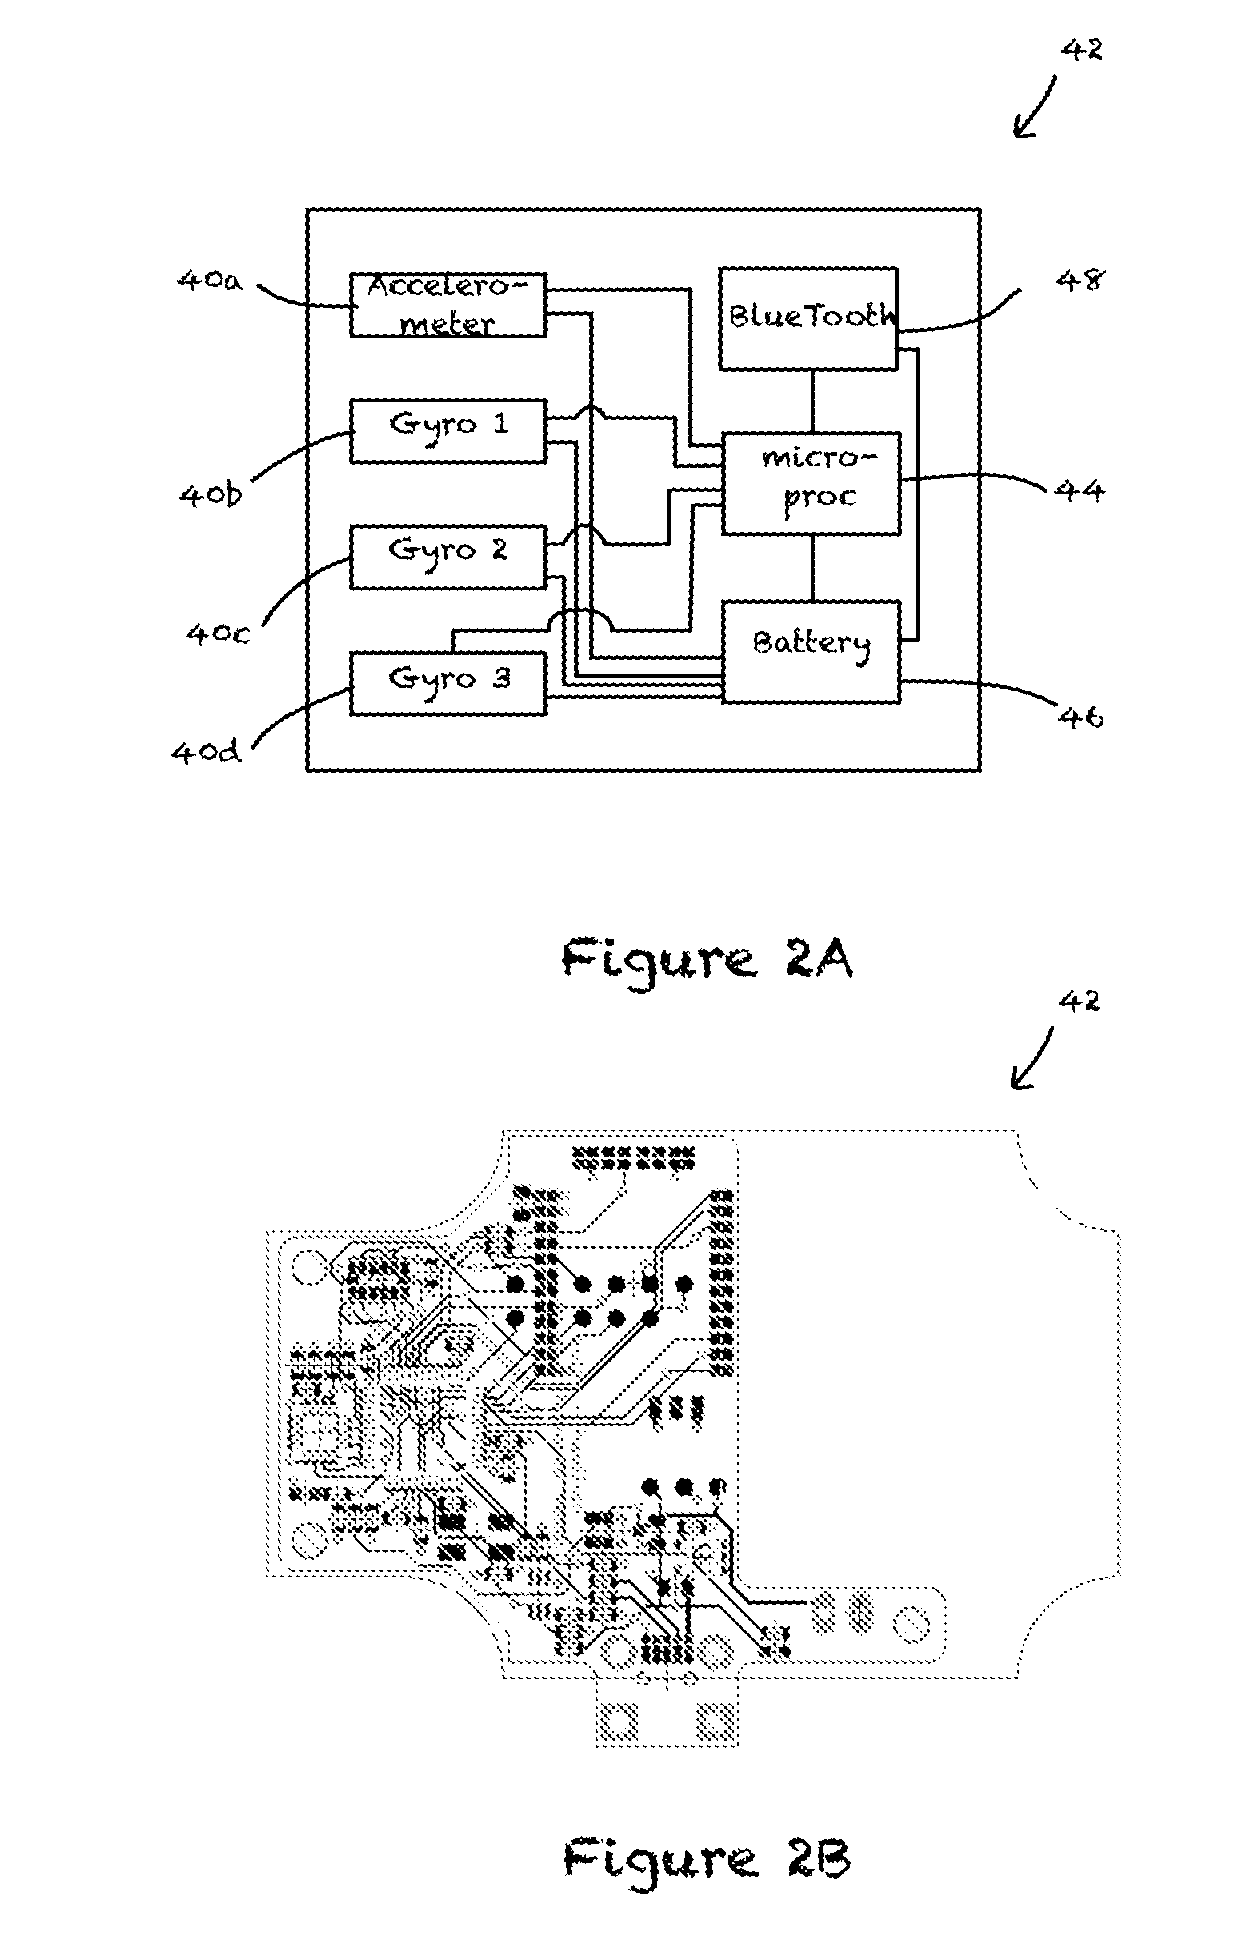 Signature-based trick determination systems and methods for skateboarding and other activities of motion